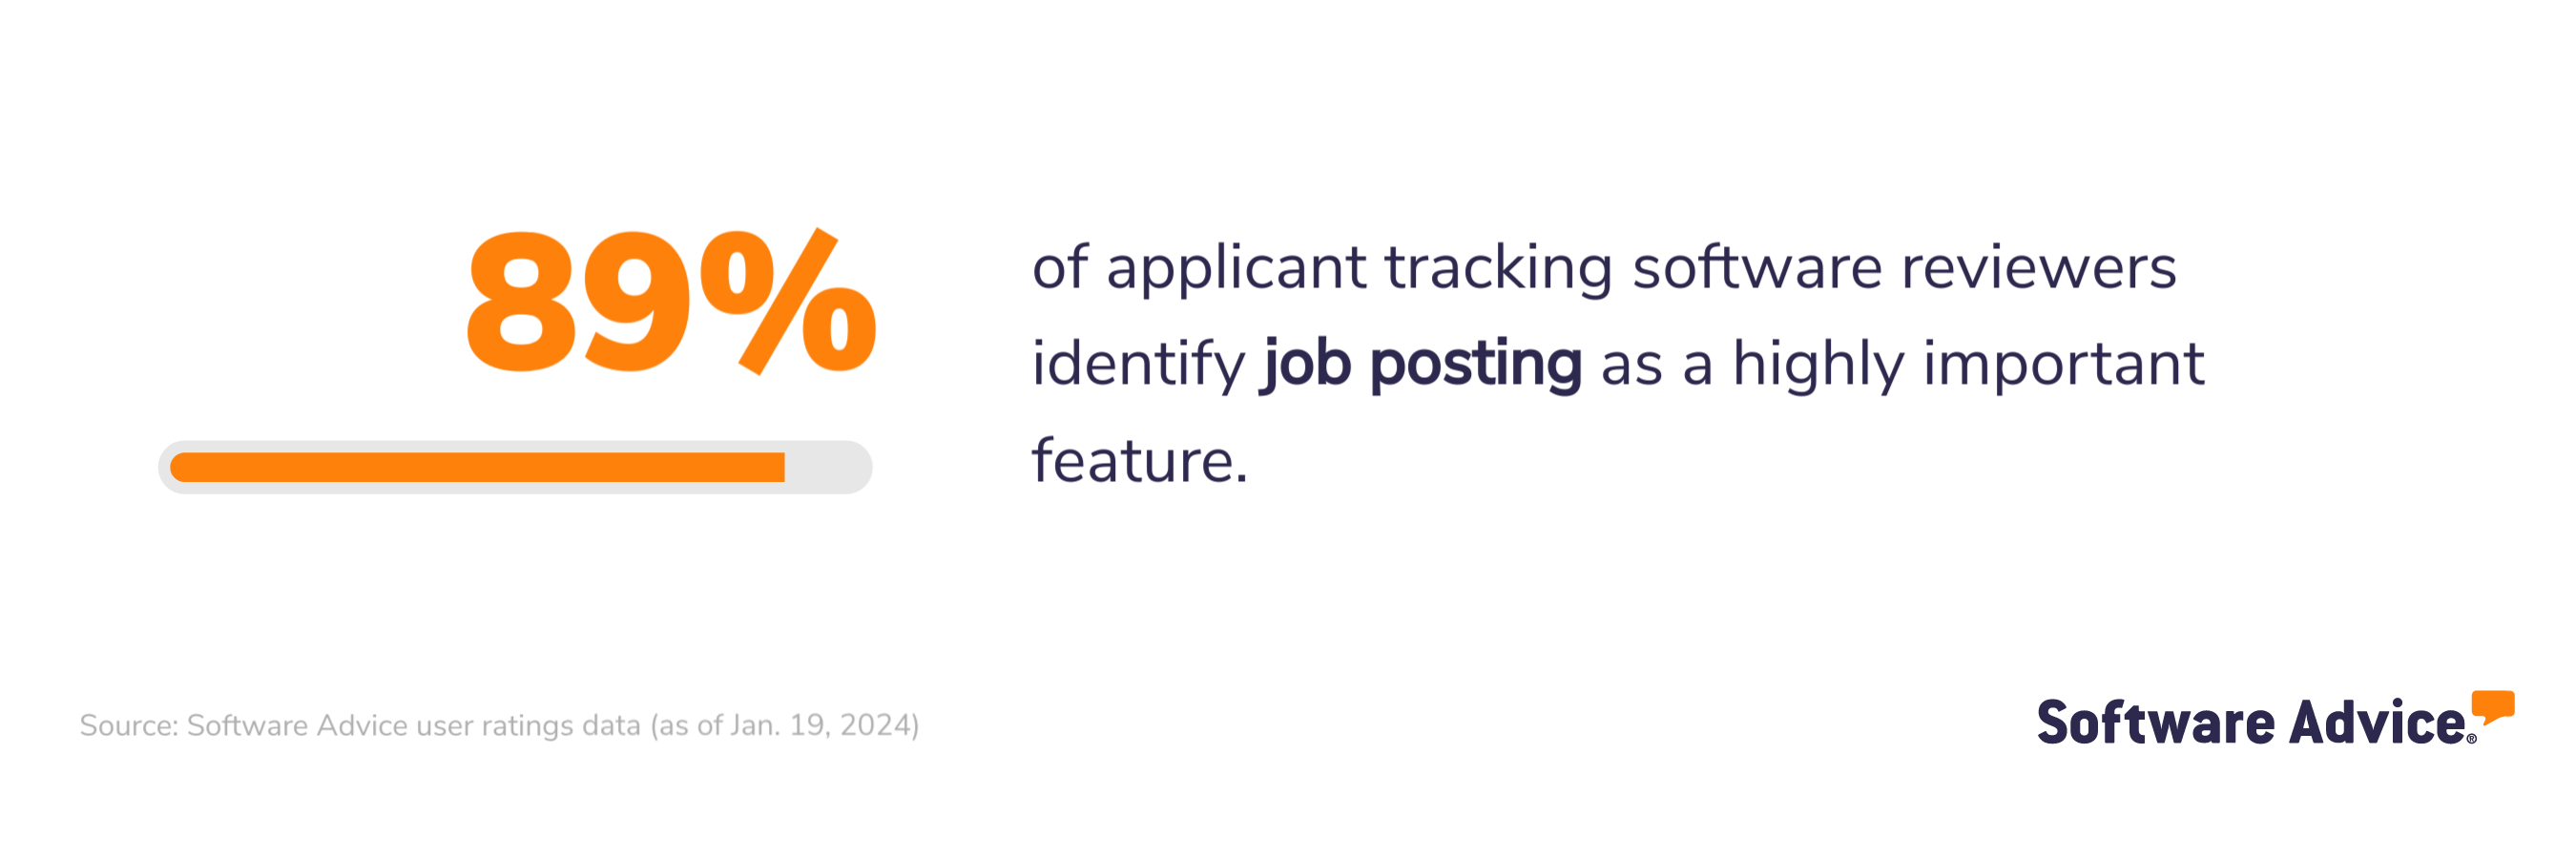 89% of applicant tracking software reviewers identify job posting as a highly important feature.